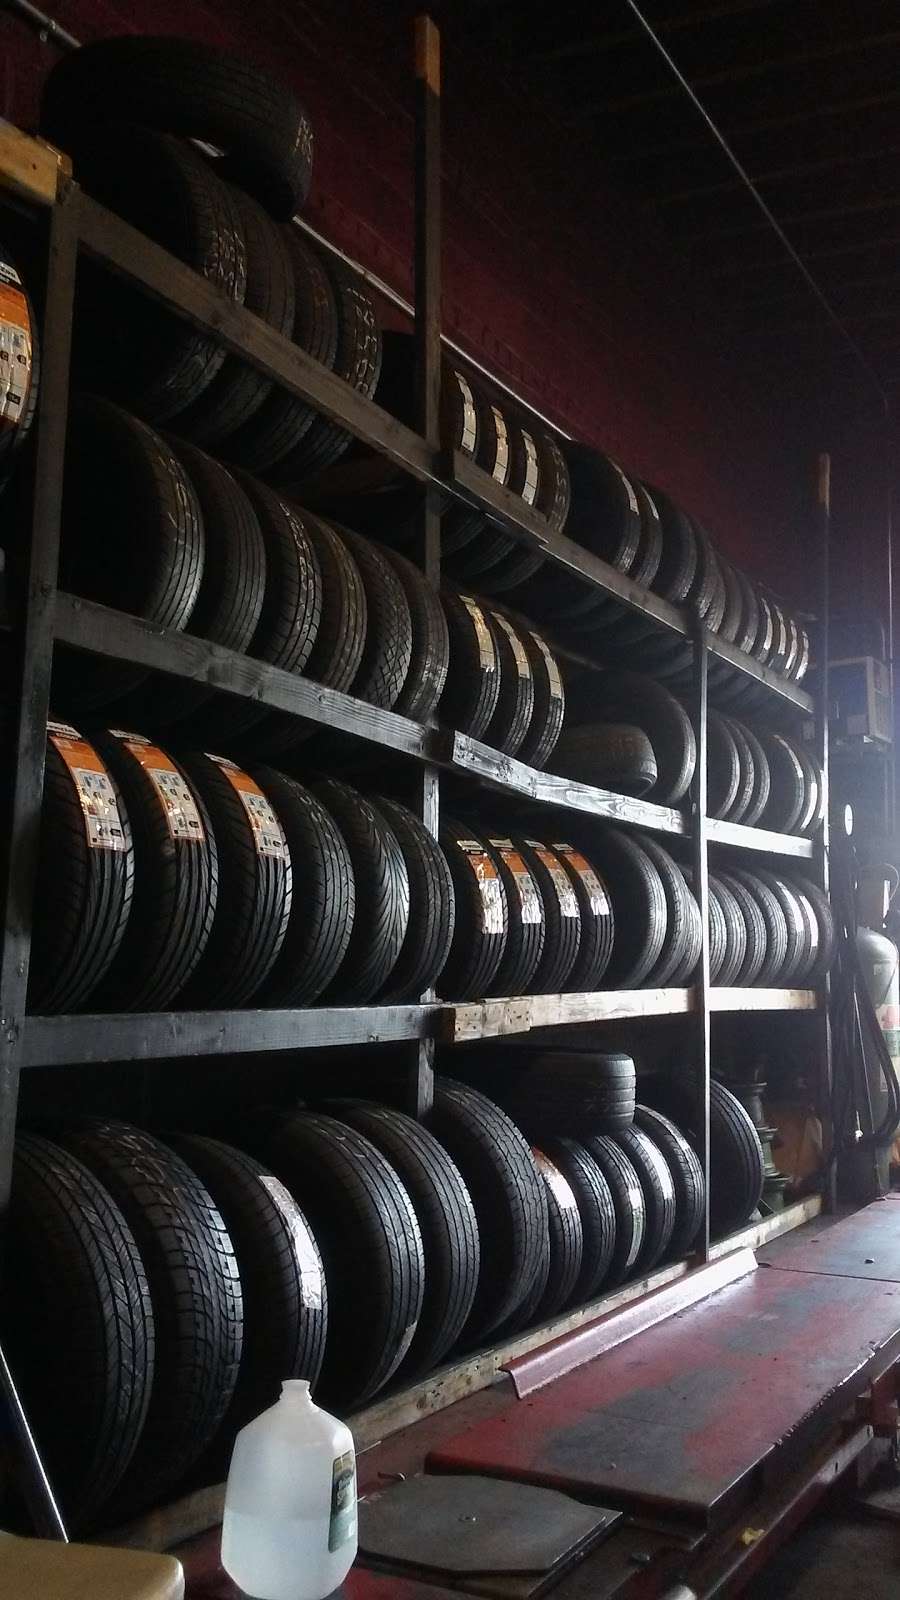 Charlies Pit Stop Tires | 23810 Linden Blvd, Elmont, NY 11003 | Phone: (516) 341-7525